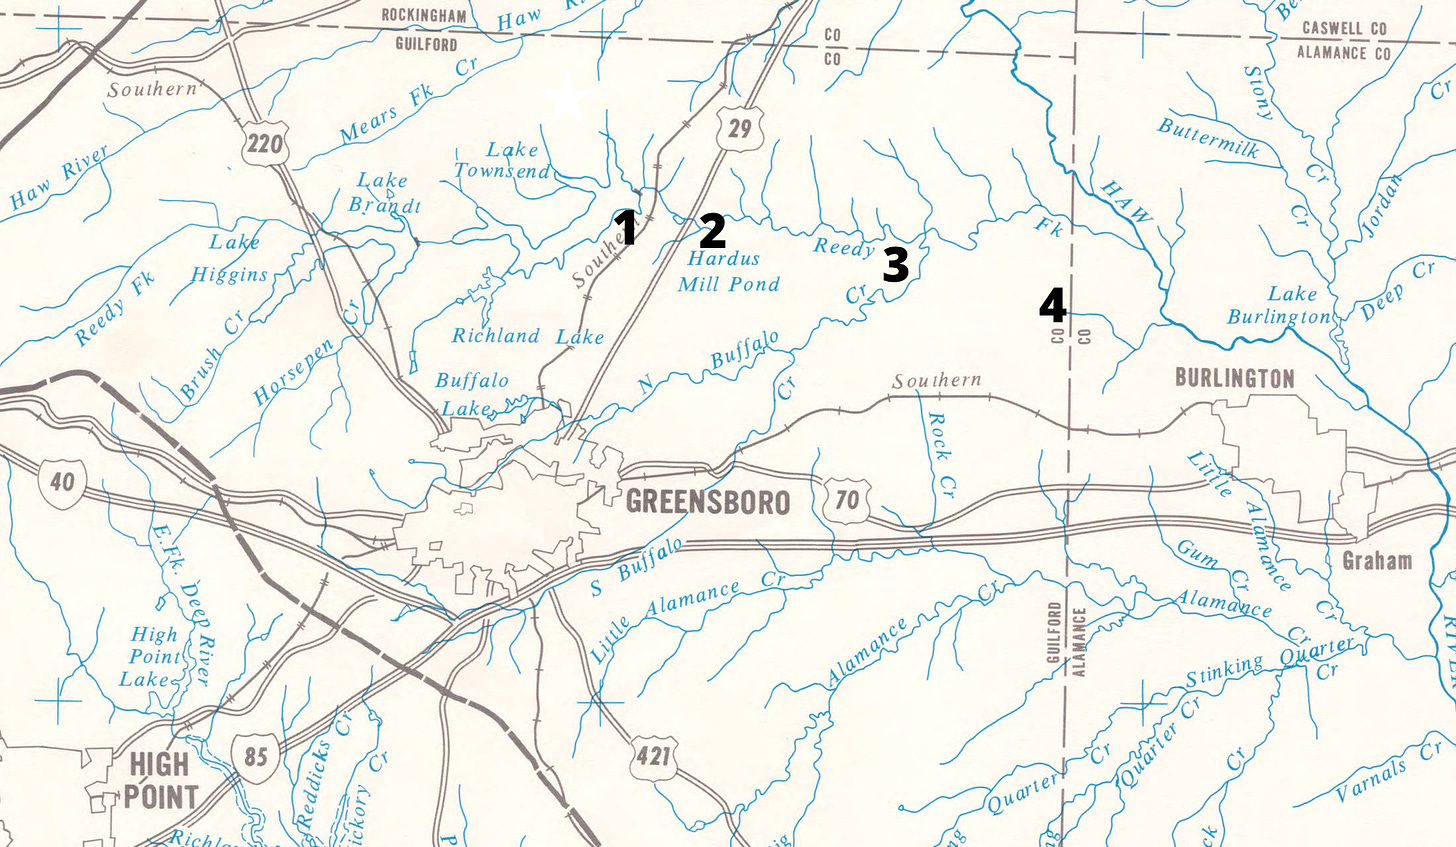 watershed map with locations labeled